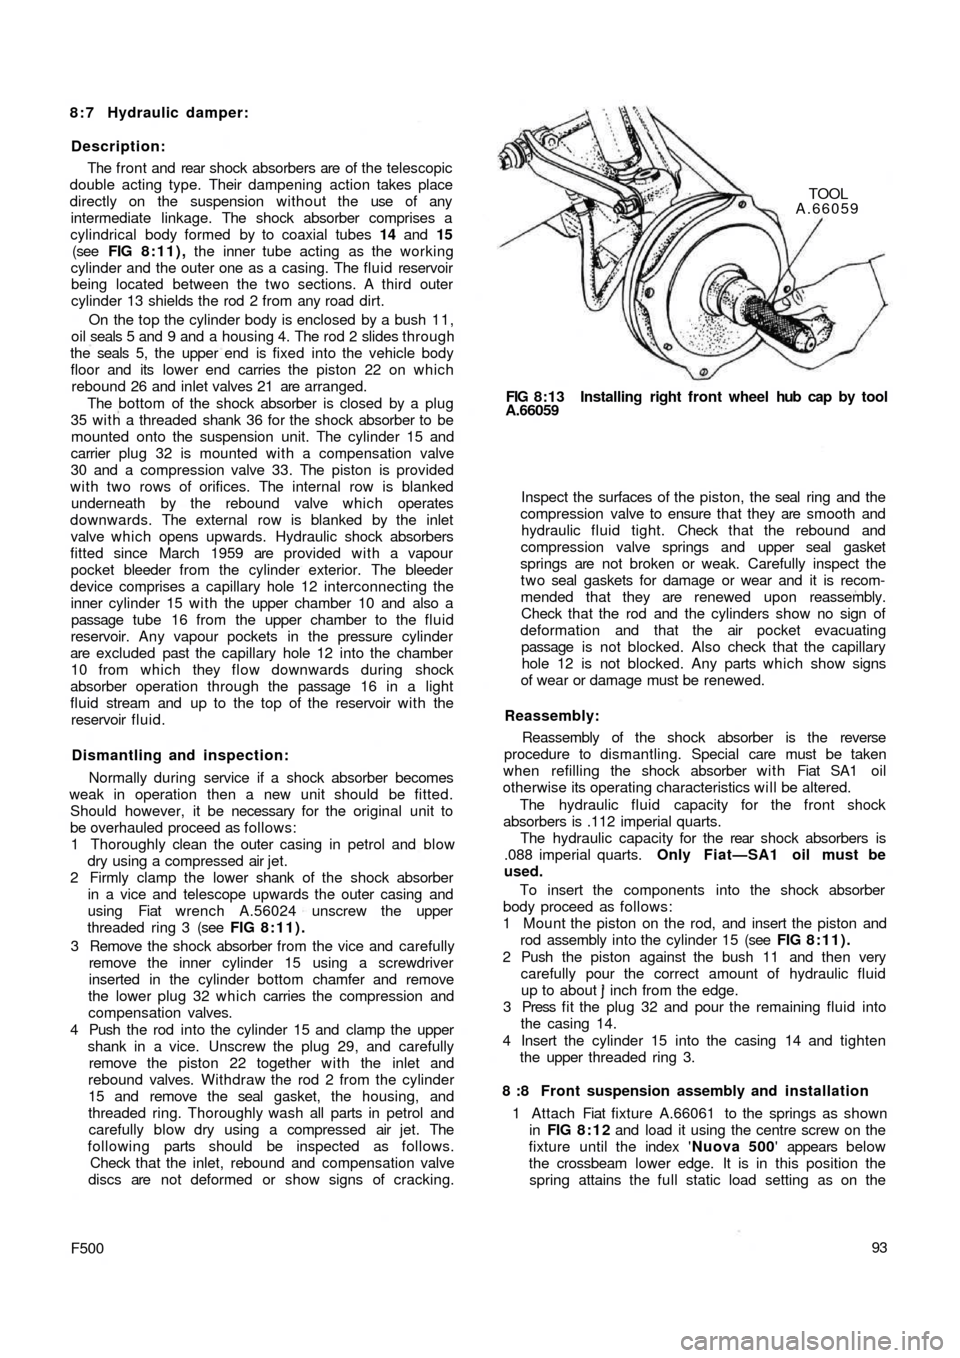 FIAT 500 1969 1.G Workshop Manual 8 : 7 Hydraulic damper:
Description:
The front and rear  shock absorbers are of the telescopic
double acting type. Their dampening action takes place
directly on the suspension without the use of any
